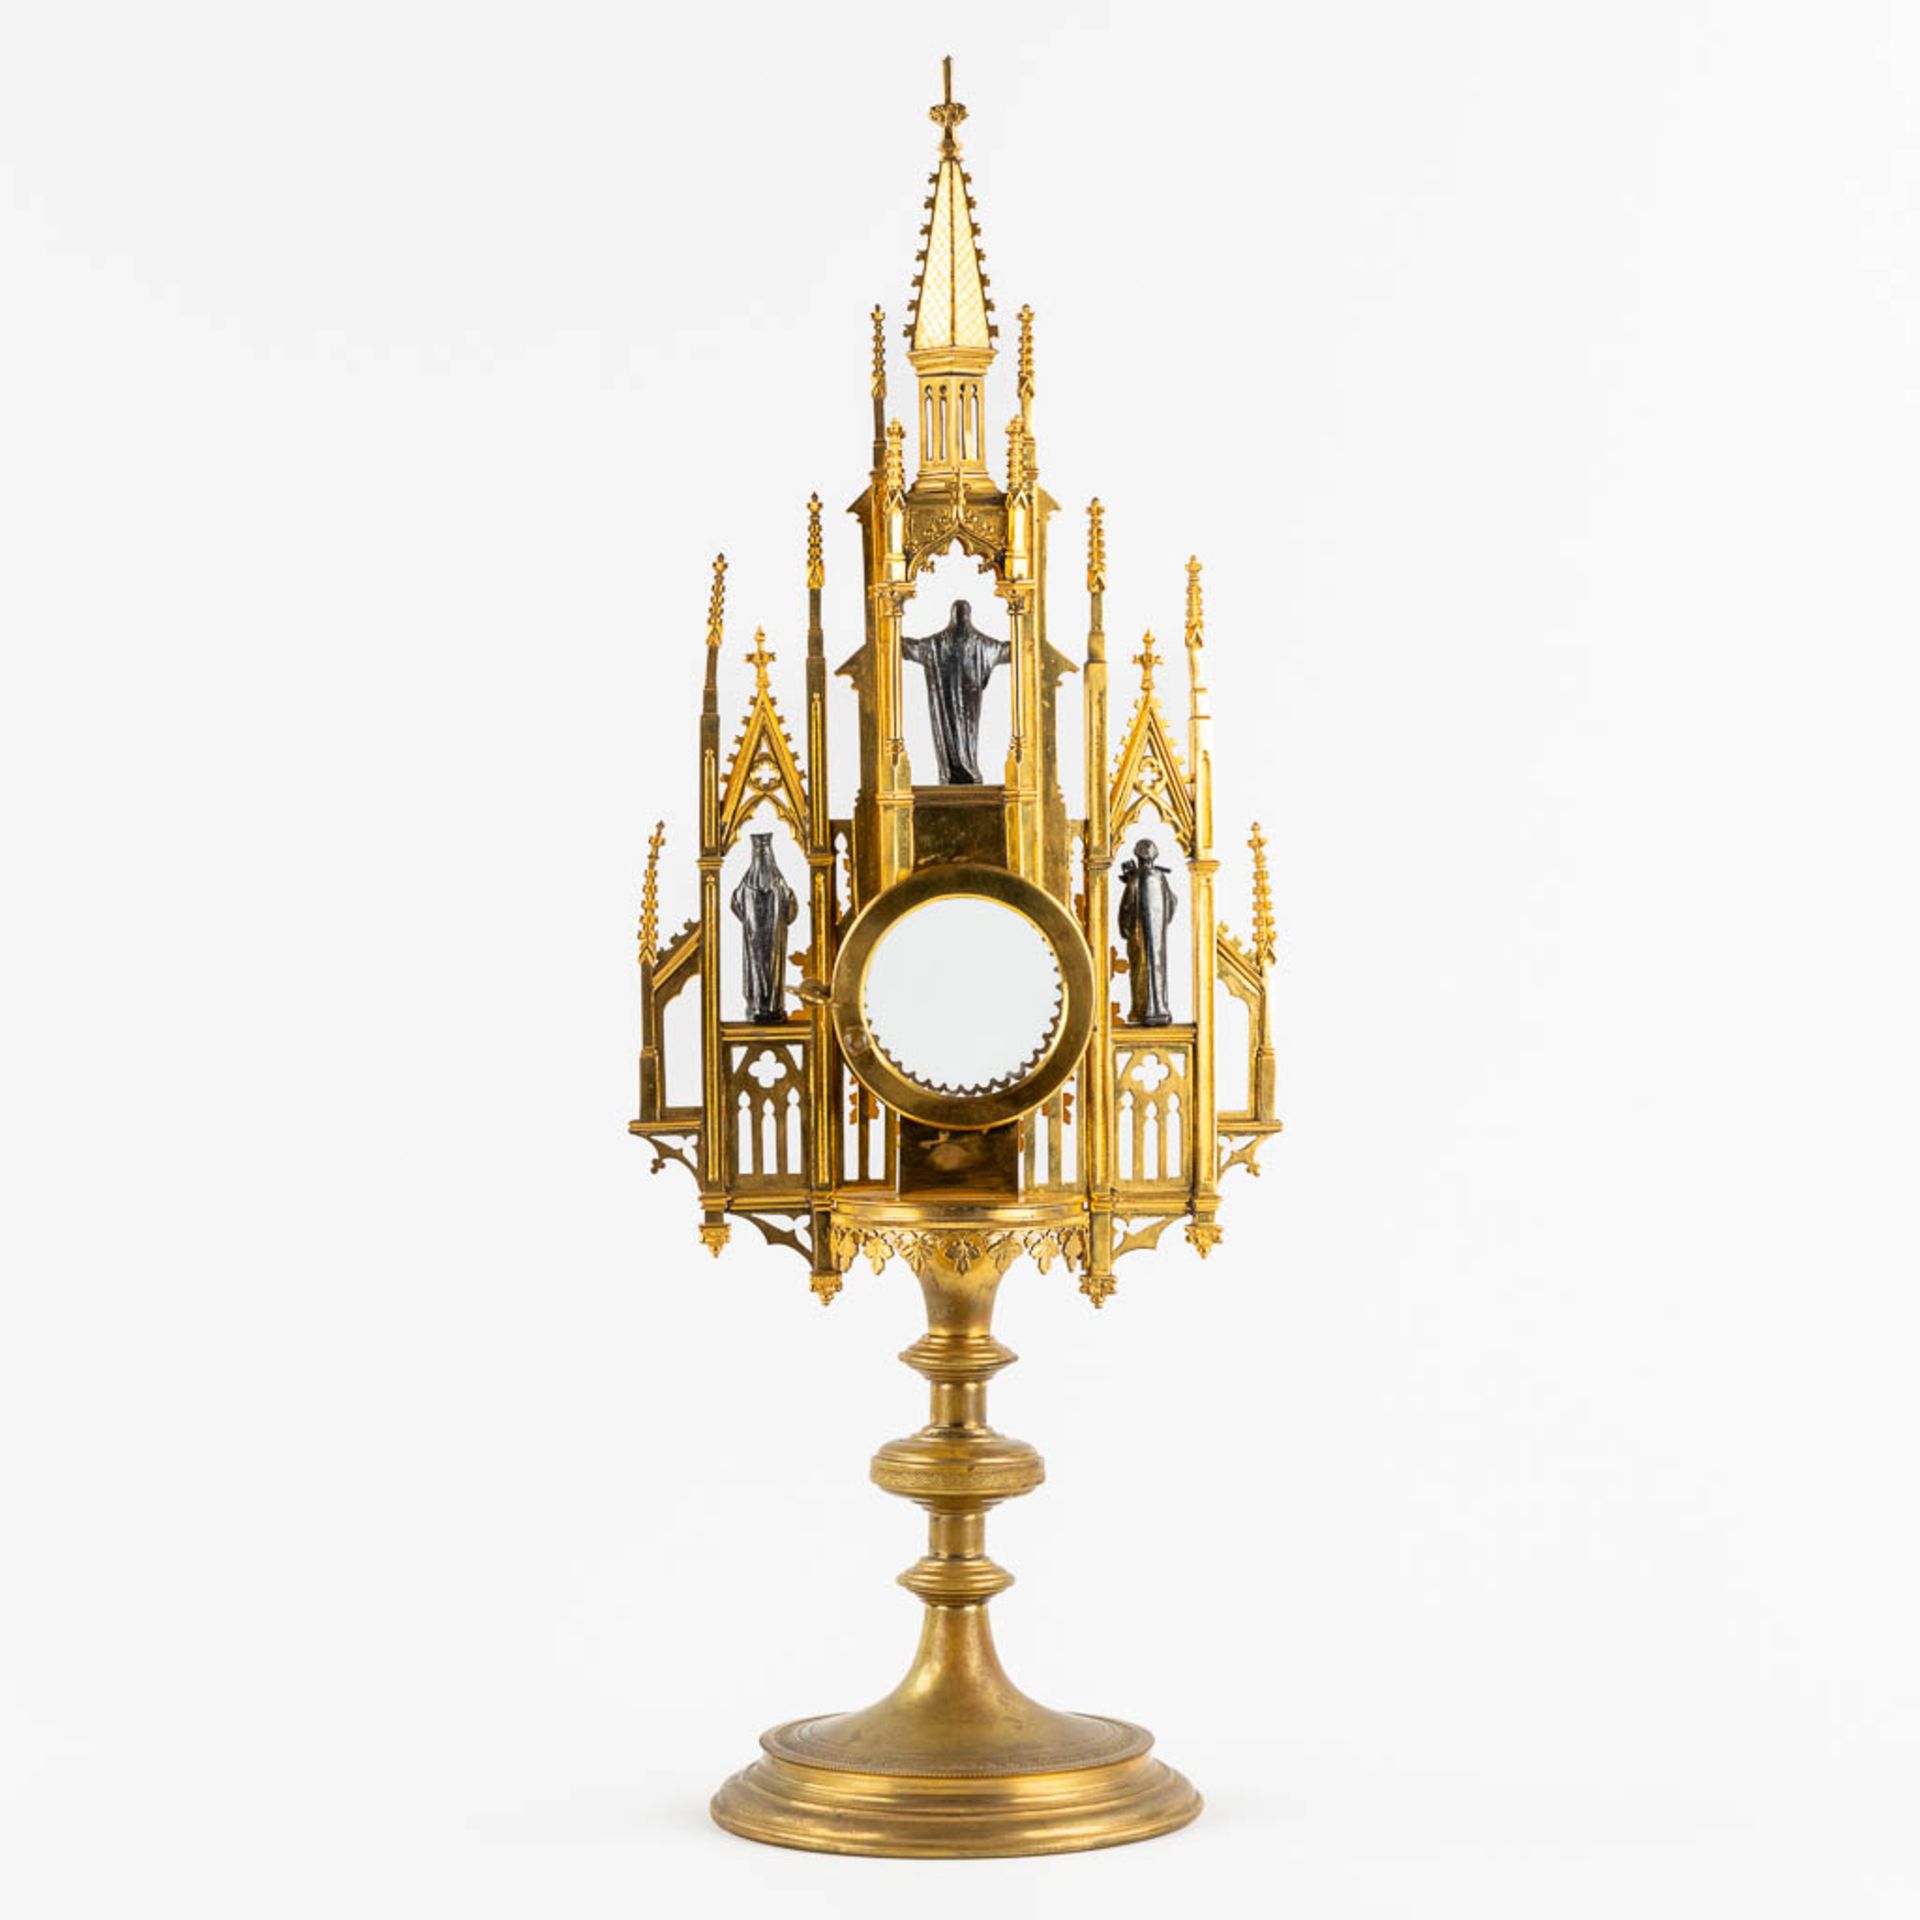 A Tower monstrance, gilt and silver plated brass, Gothic Revival. 19th C. (W:21,5 x H:58 cm) - Image 11 of 22